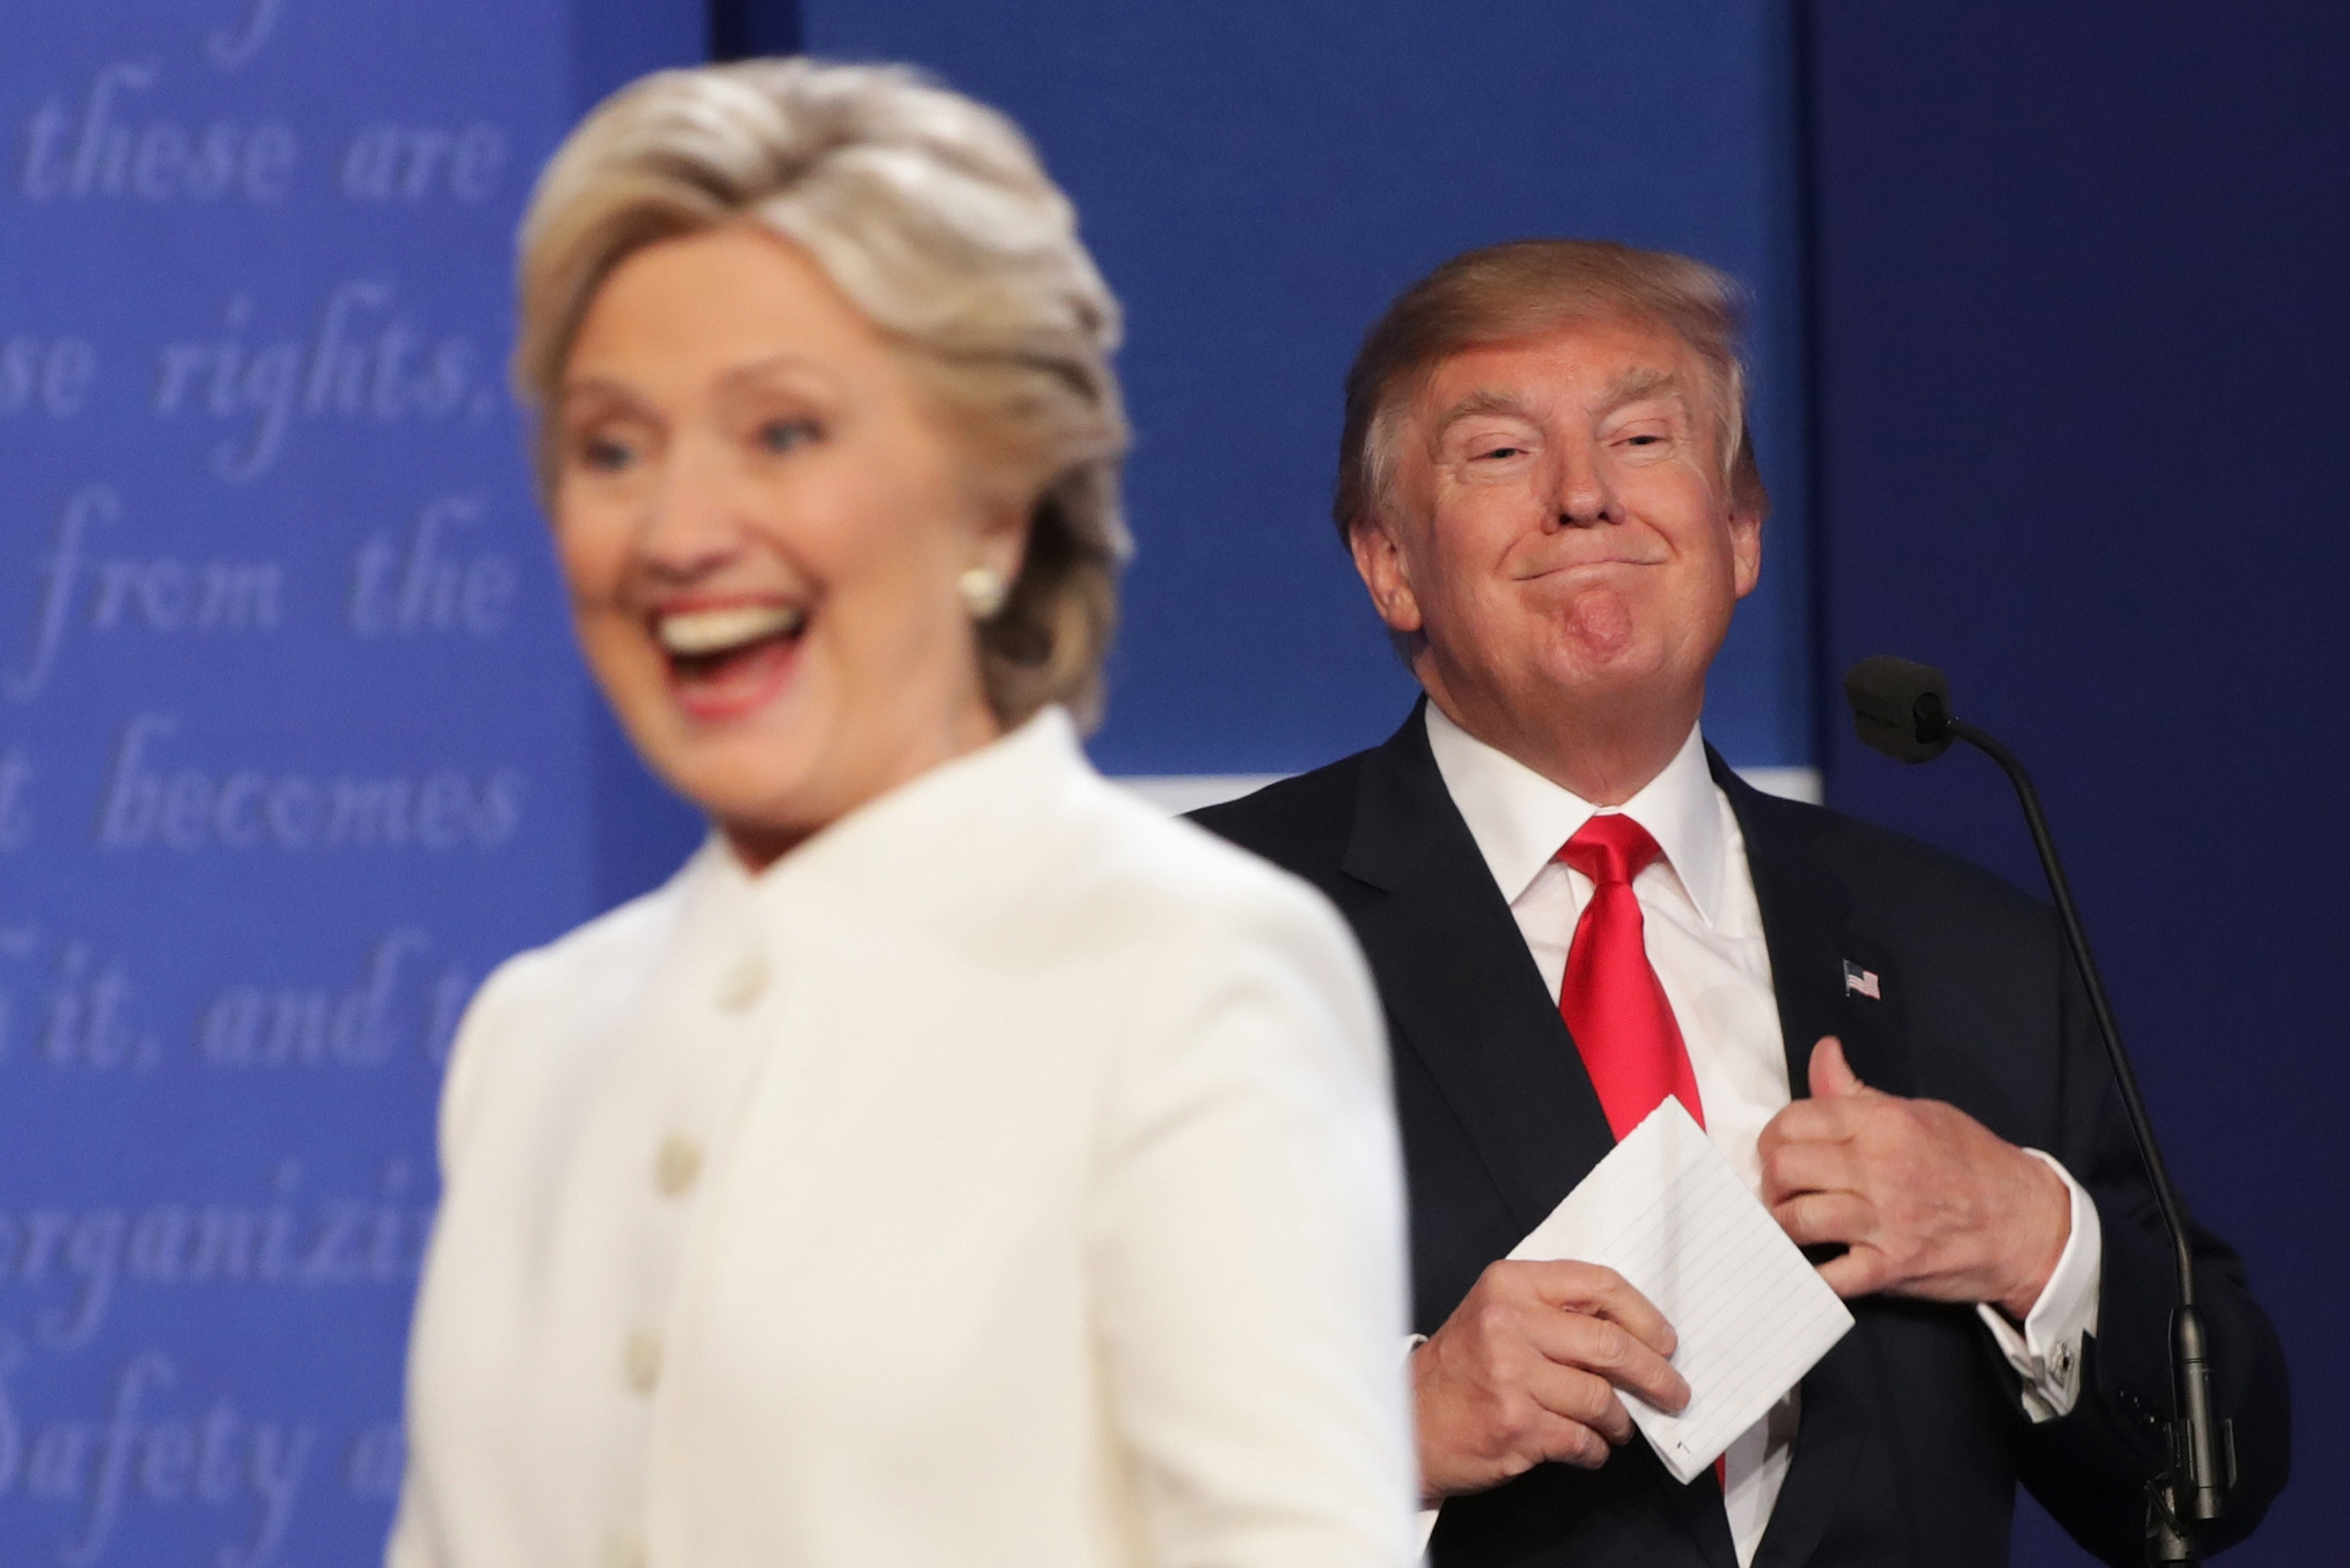 Hillary Clinton walks off stage as Donald Trump smiles after the third U.S. presidential debate in Las Vegas, on Oct. 19, 2016. (Chip Somodevilla—Getty Images)